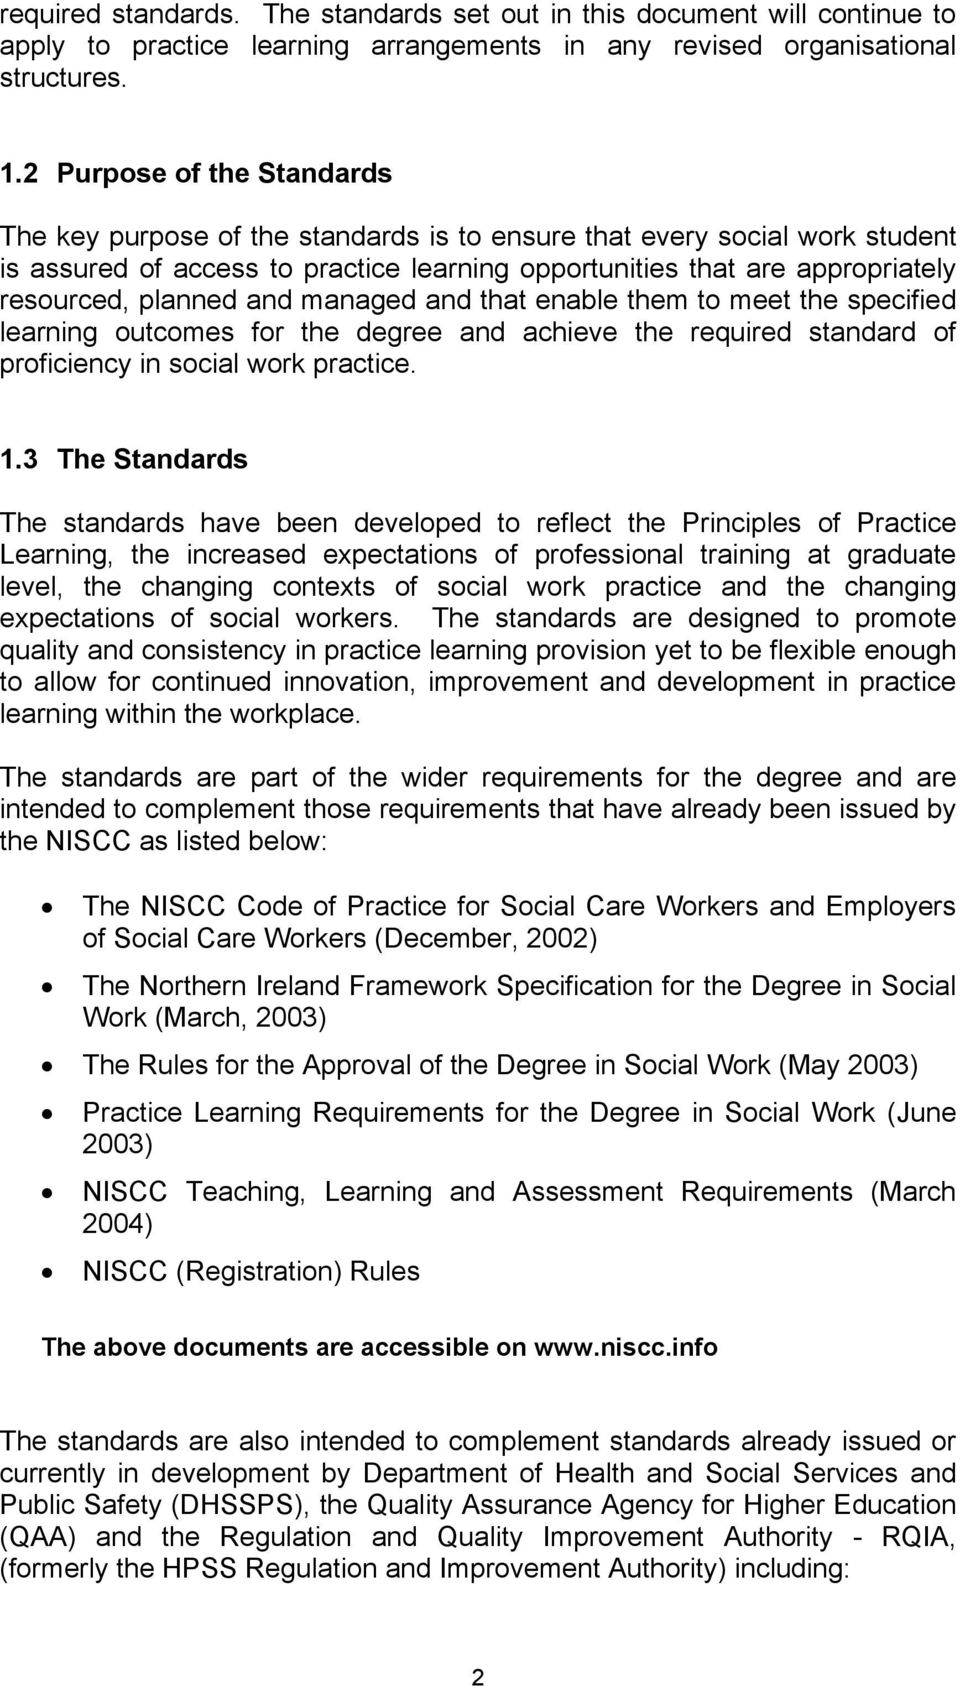 planned and managed and that enable them to meet the specified learning outcomes for the degree and achieve the required standard of proficiency in social work practice. 1.